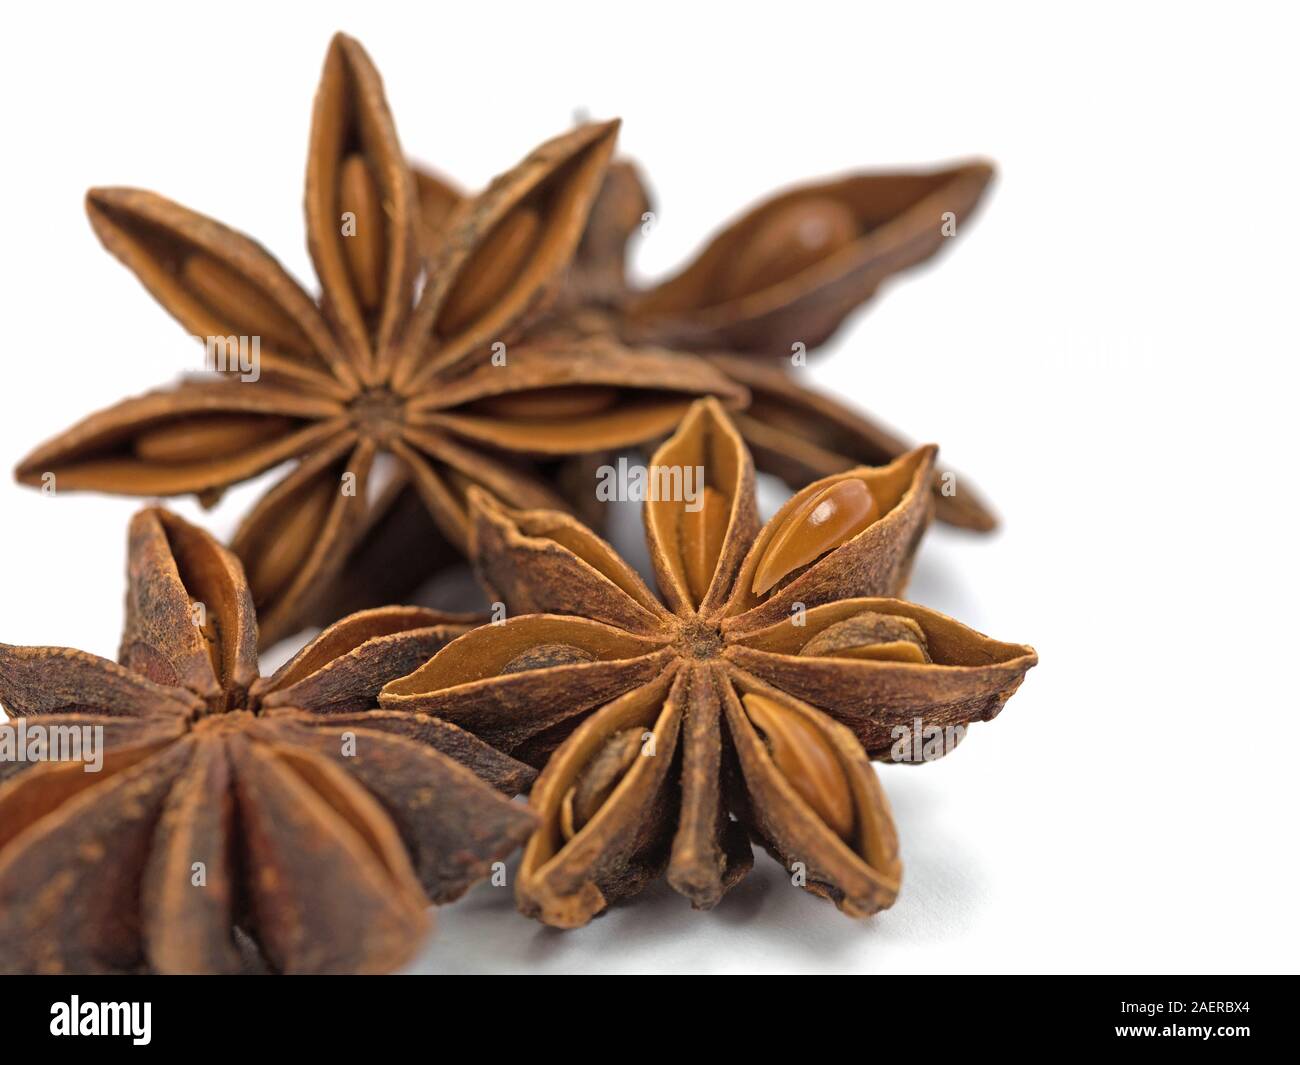 Anise stars in front of white background Stock Photo